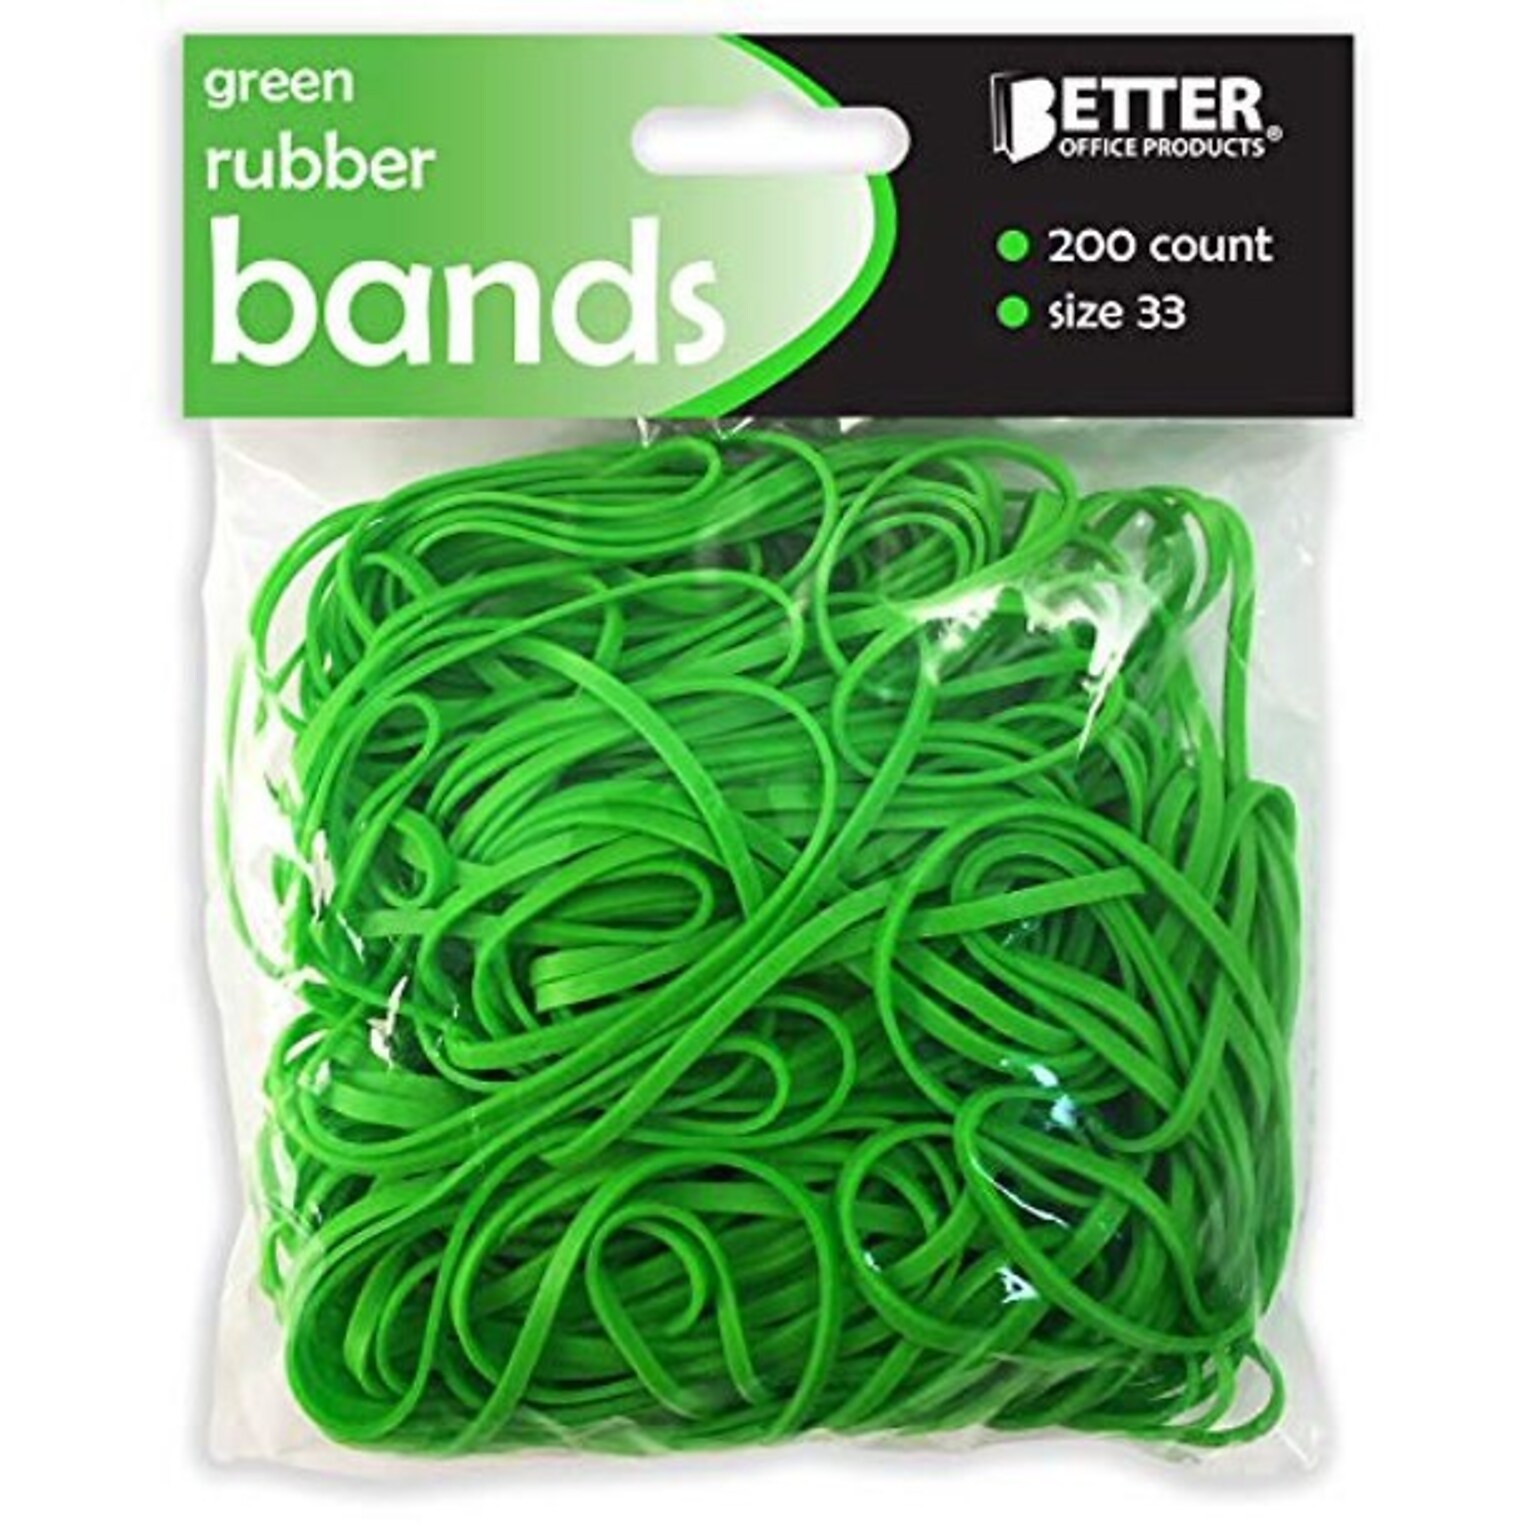 Better Office Multi-Purpose #33 Rubber Bands, 3.5 x 0.125, Latex Free, Vibrant Green, 200/Pack (33908)